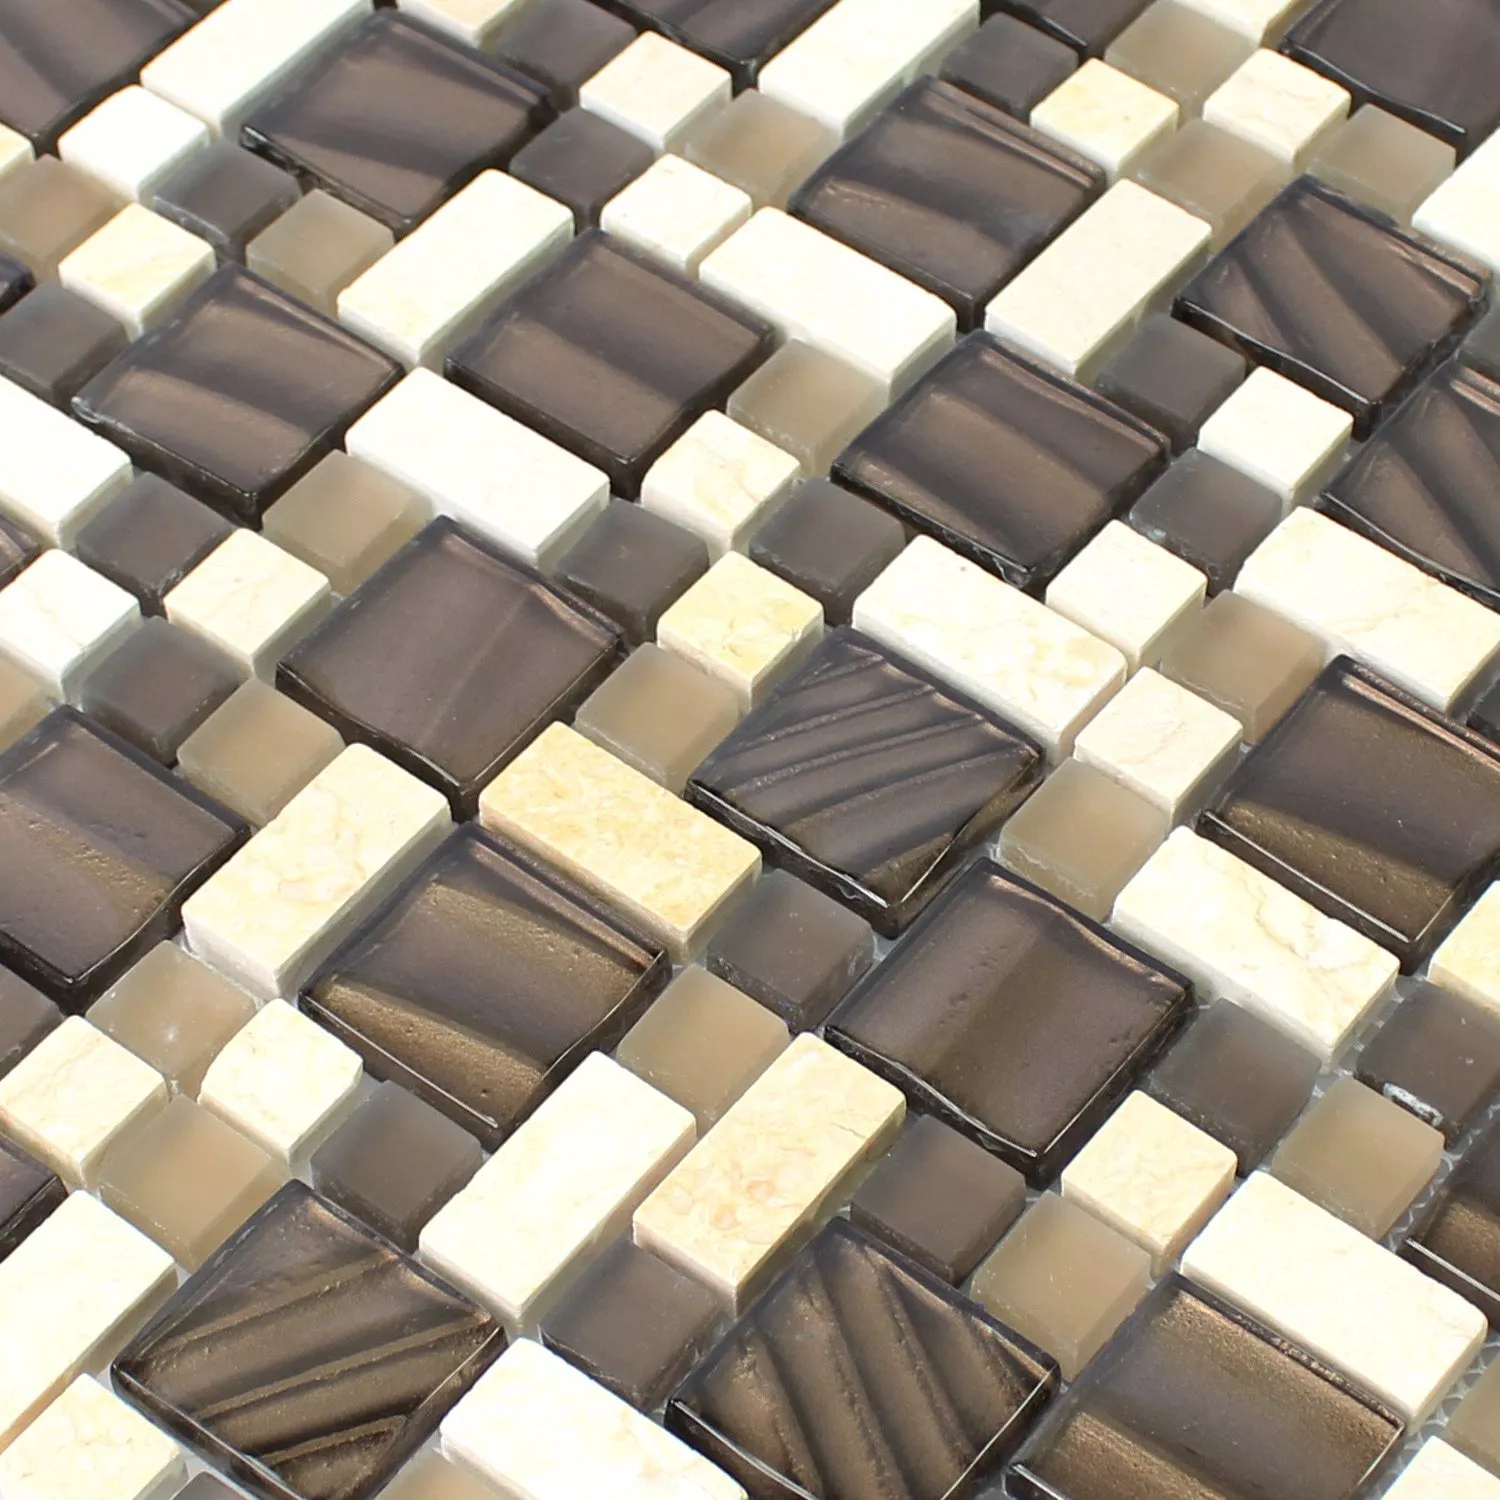 Sample Mosaic Tiles Glass Natural Stone Brown Beige